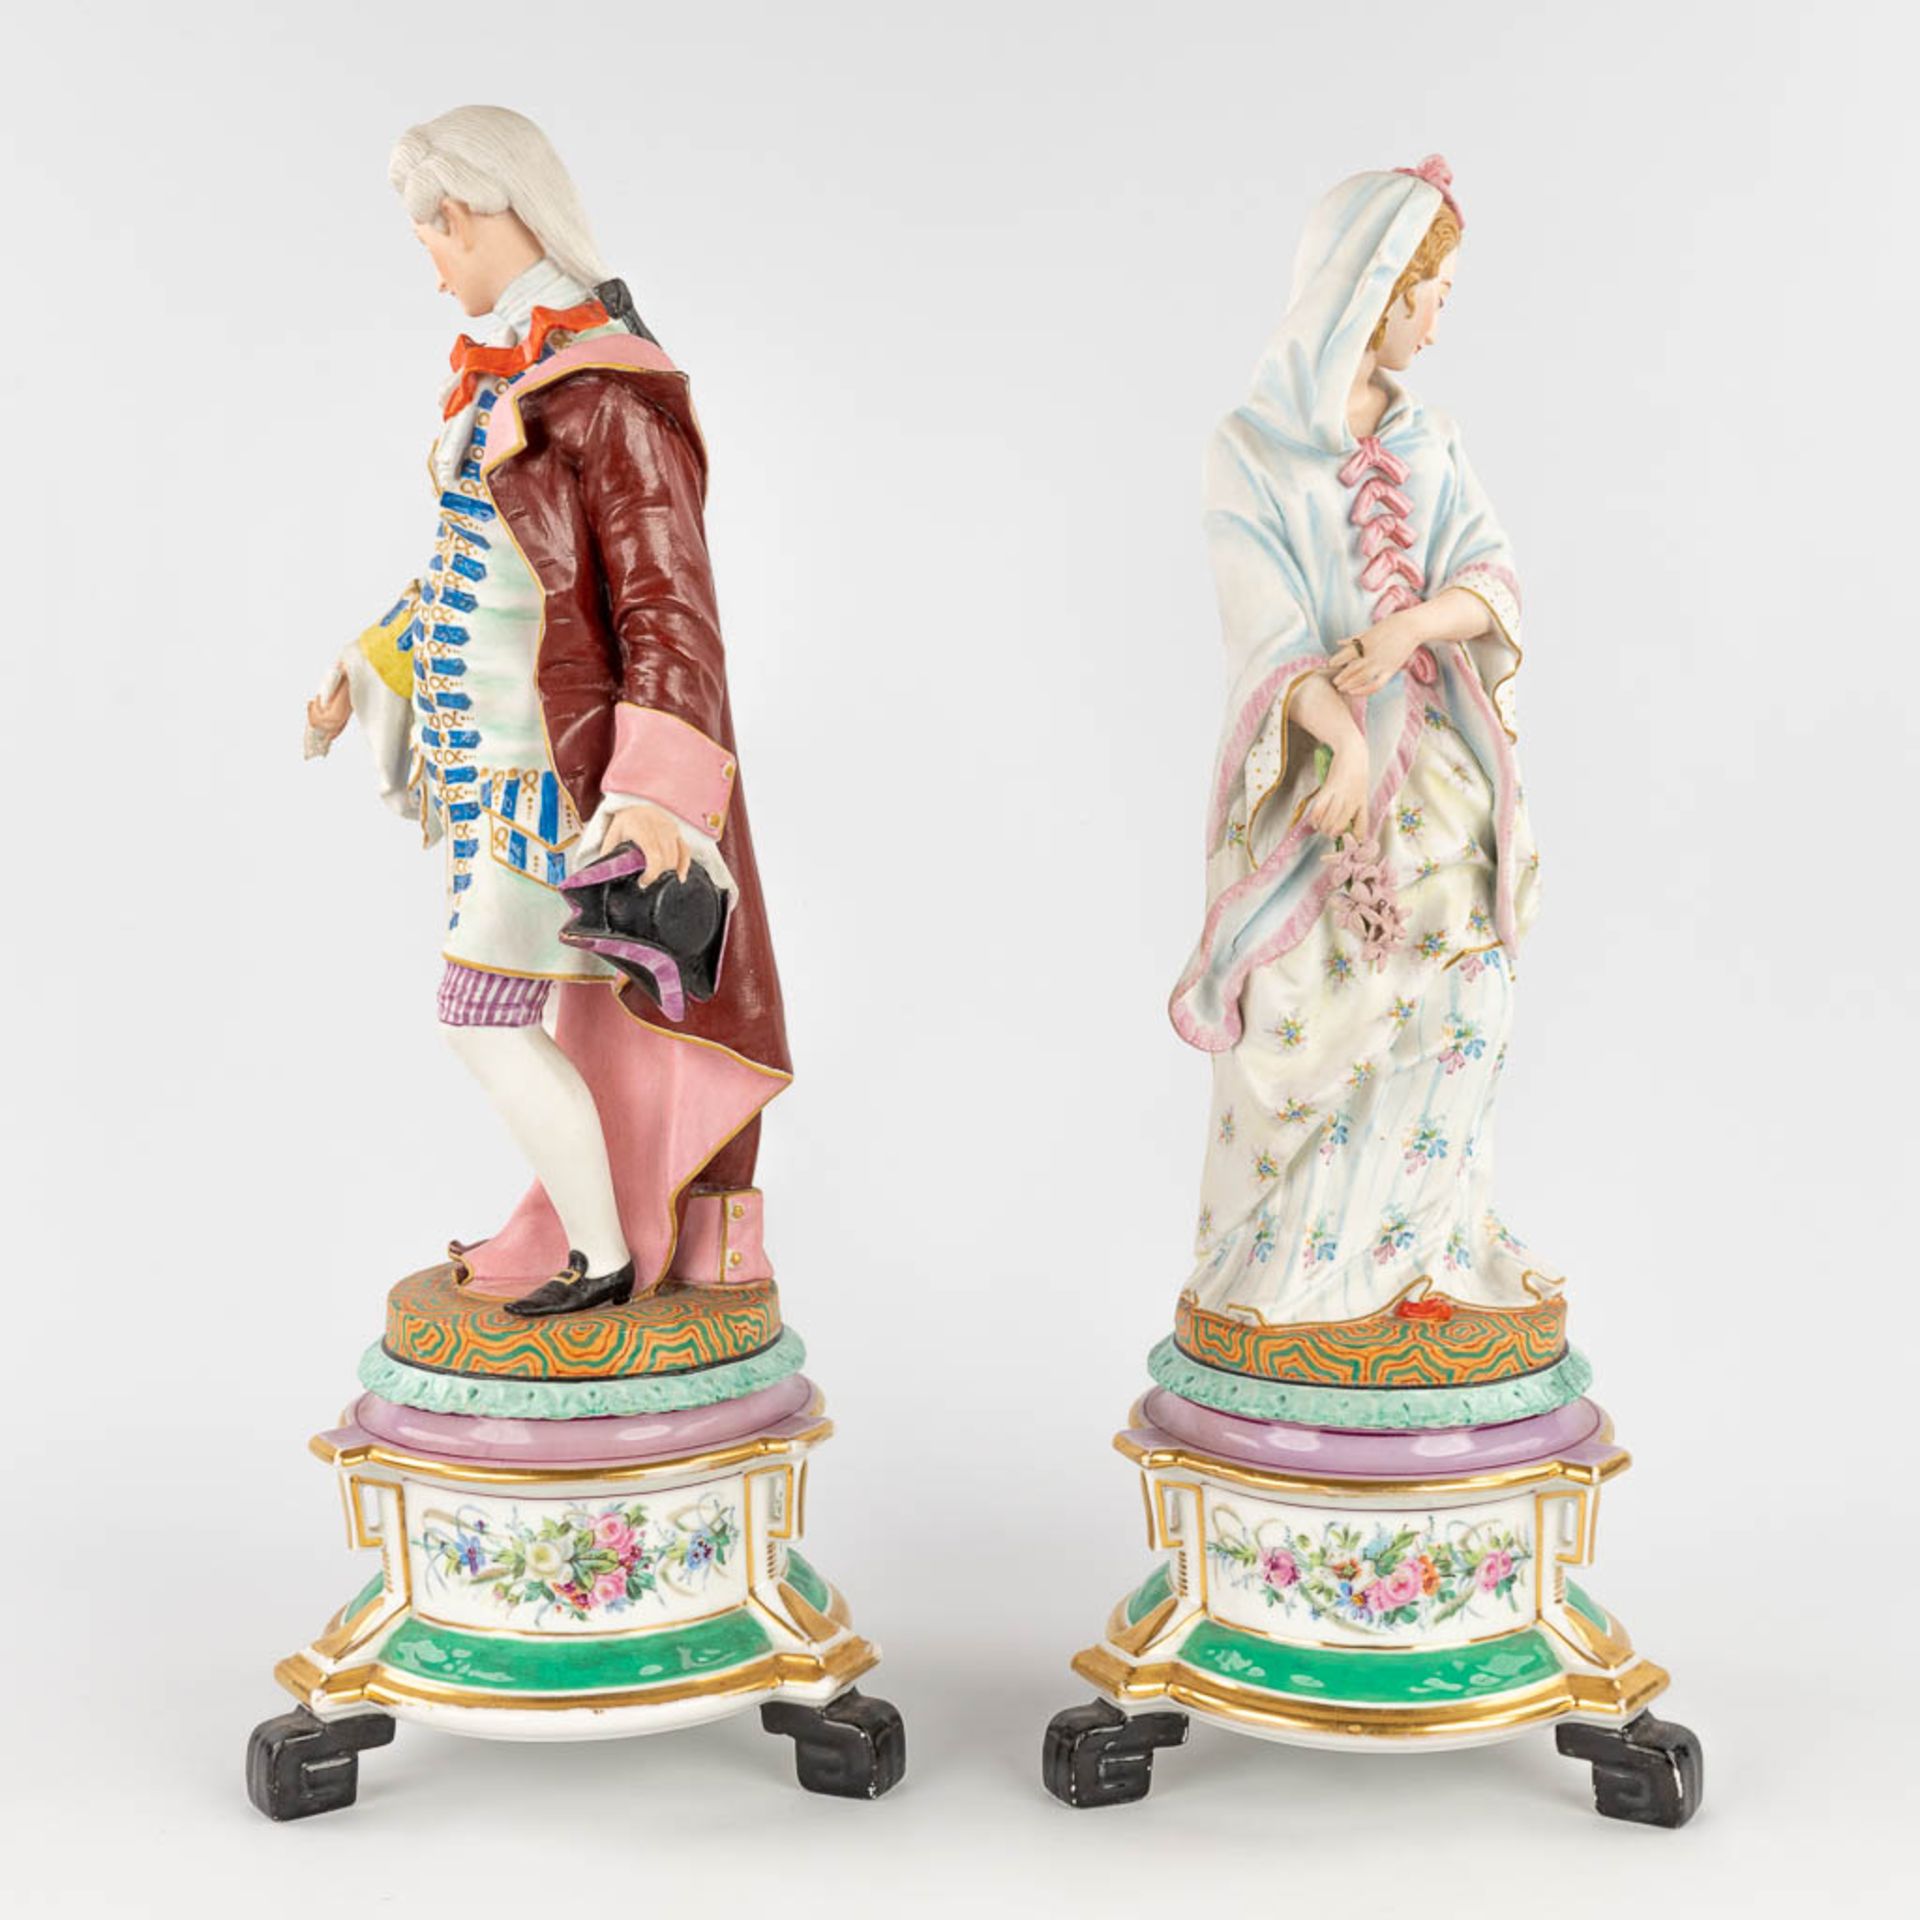 A pair of antique bisque figurines, standing on a glazed porcelain base. (L: 18 x W: 18 x H: 49 cm) - Image 6 of 24